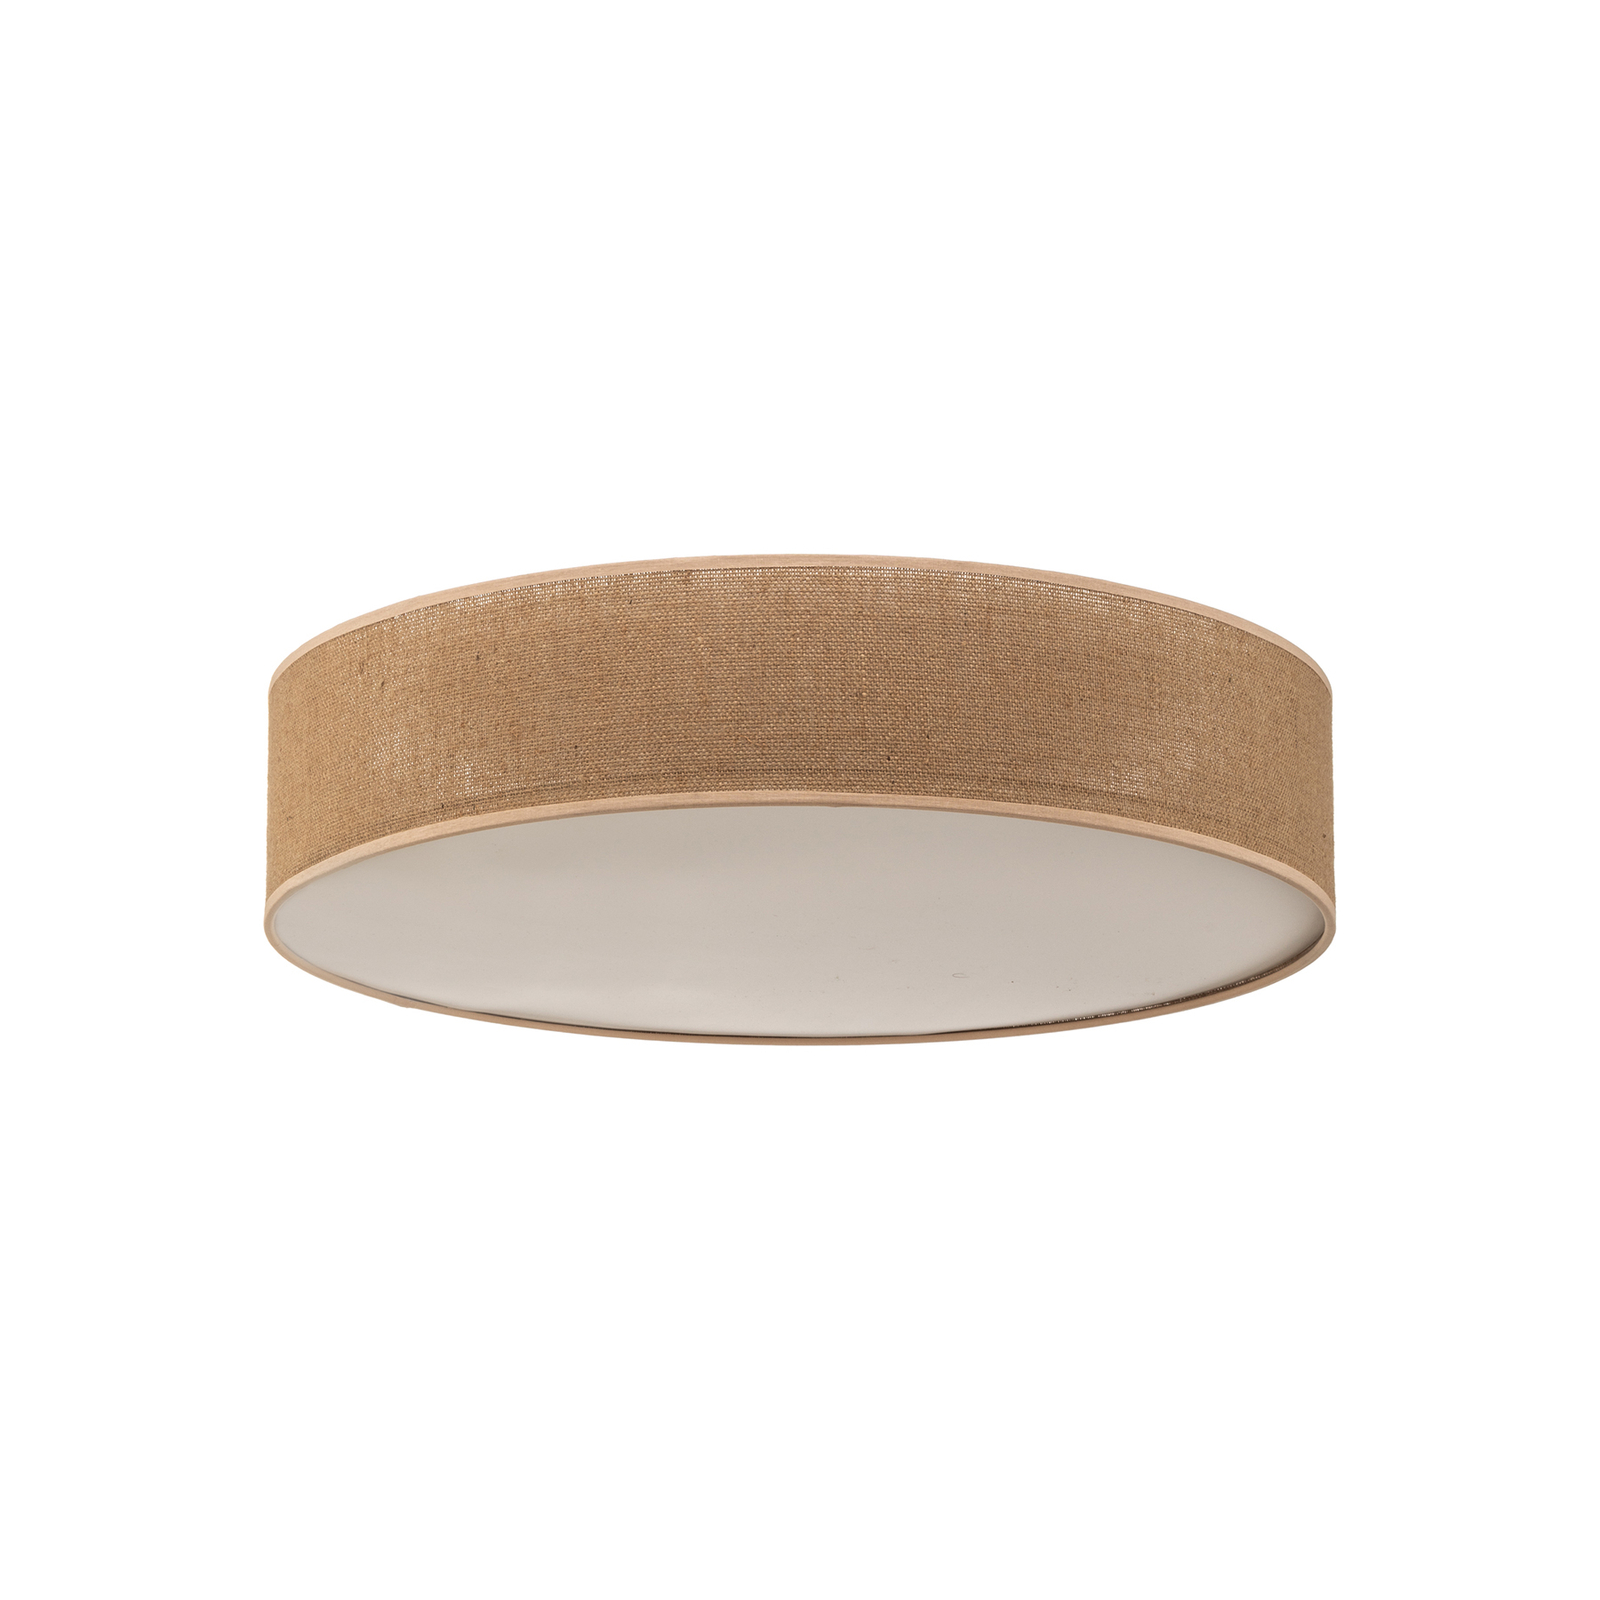 Jute ceiling light with a beige lampshade, Ø 58 cm